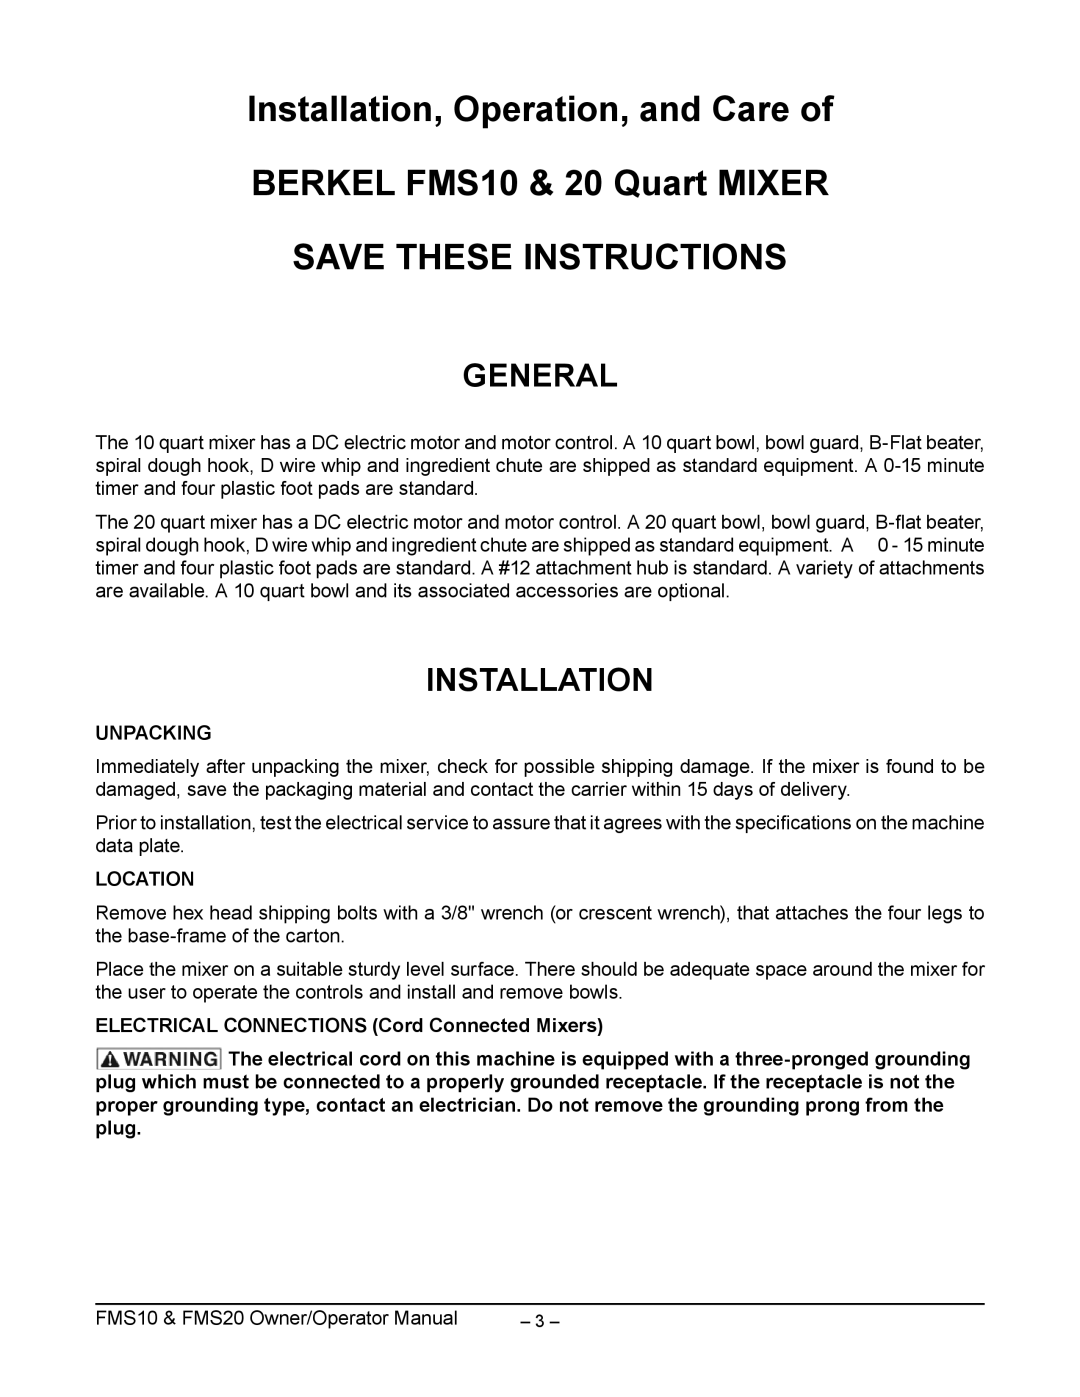 Berkel FMS20 manual Installation, Operation, and Care of BERKEL FMS10 & 20 Quart MIXER, Save These Instructions, General 